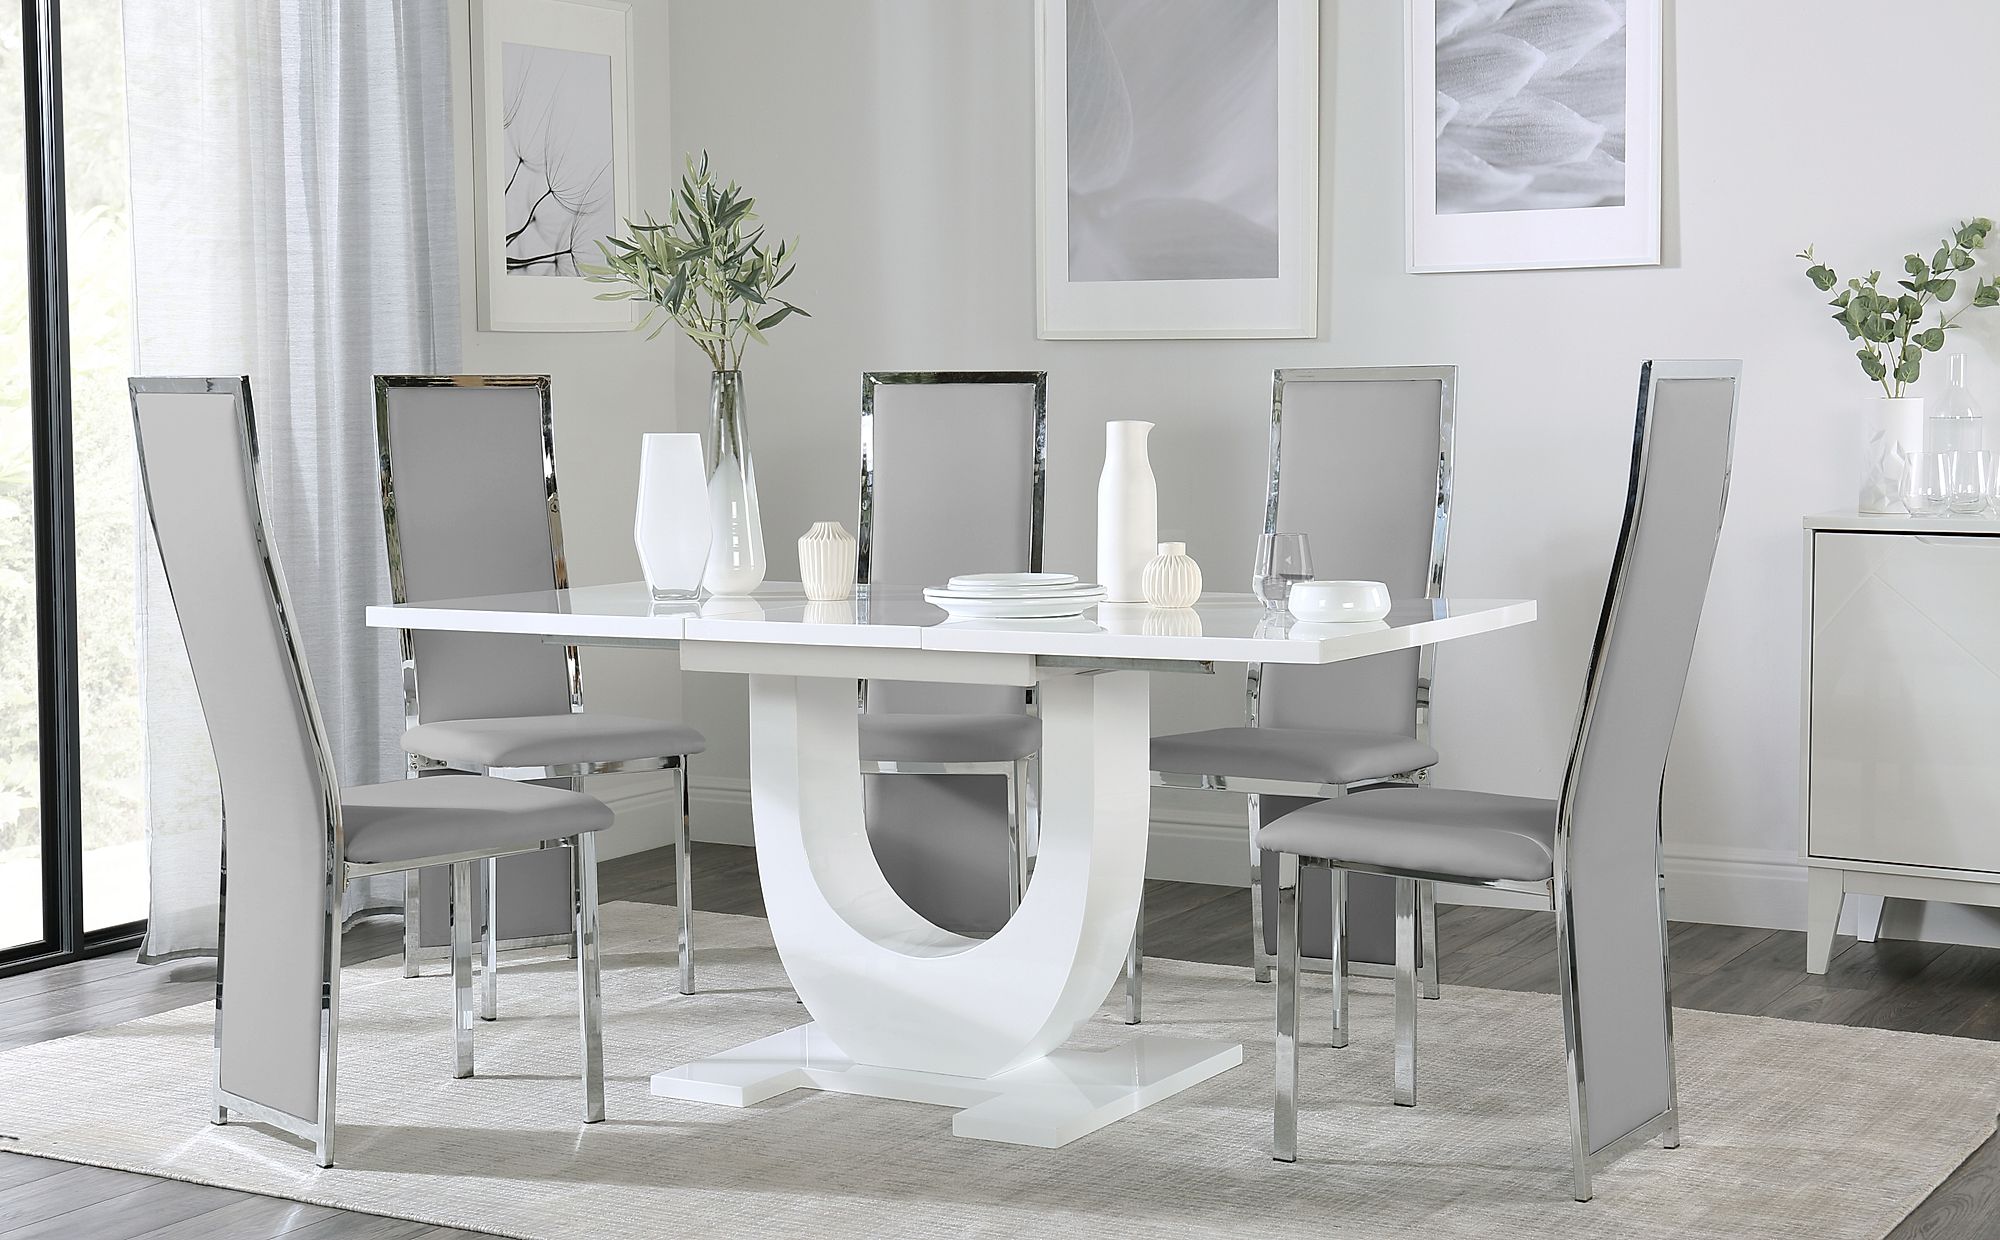 Oslo White High Gloss Extending Dining Table with 4 Celeste Light Grey ...
 High Dining Room Tables